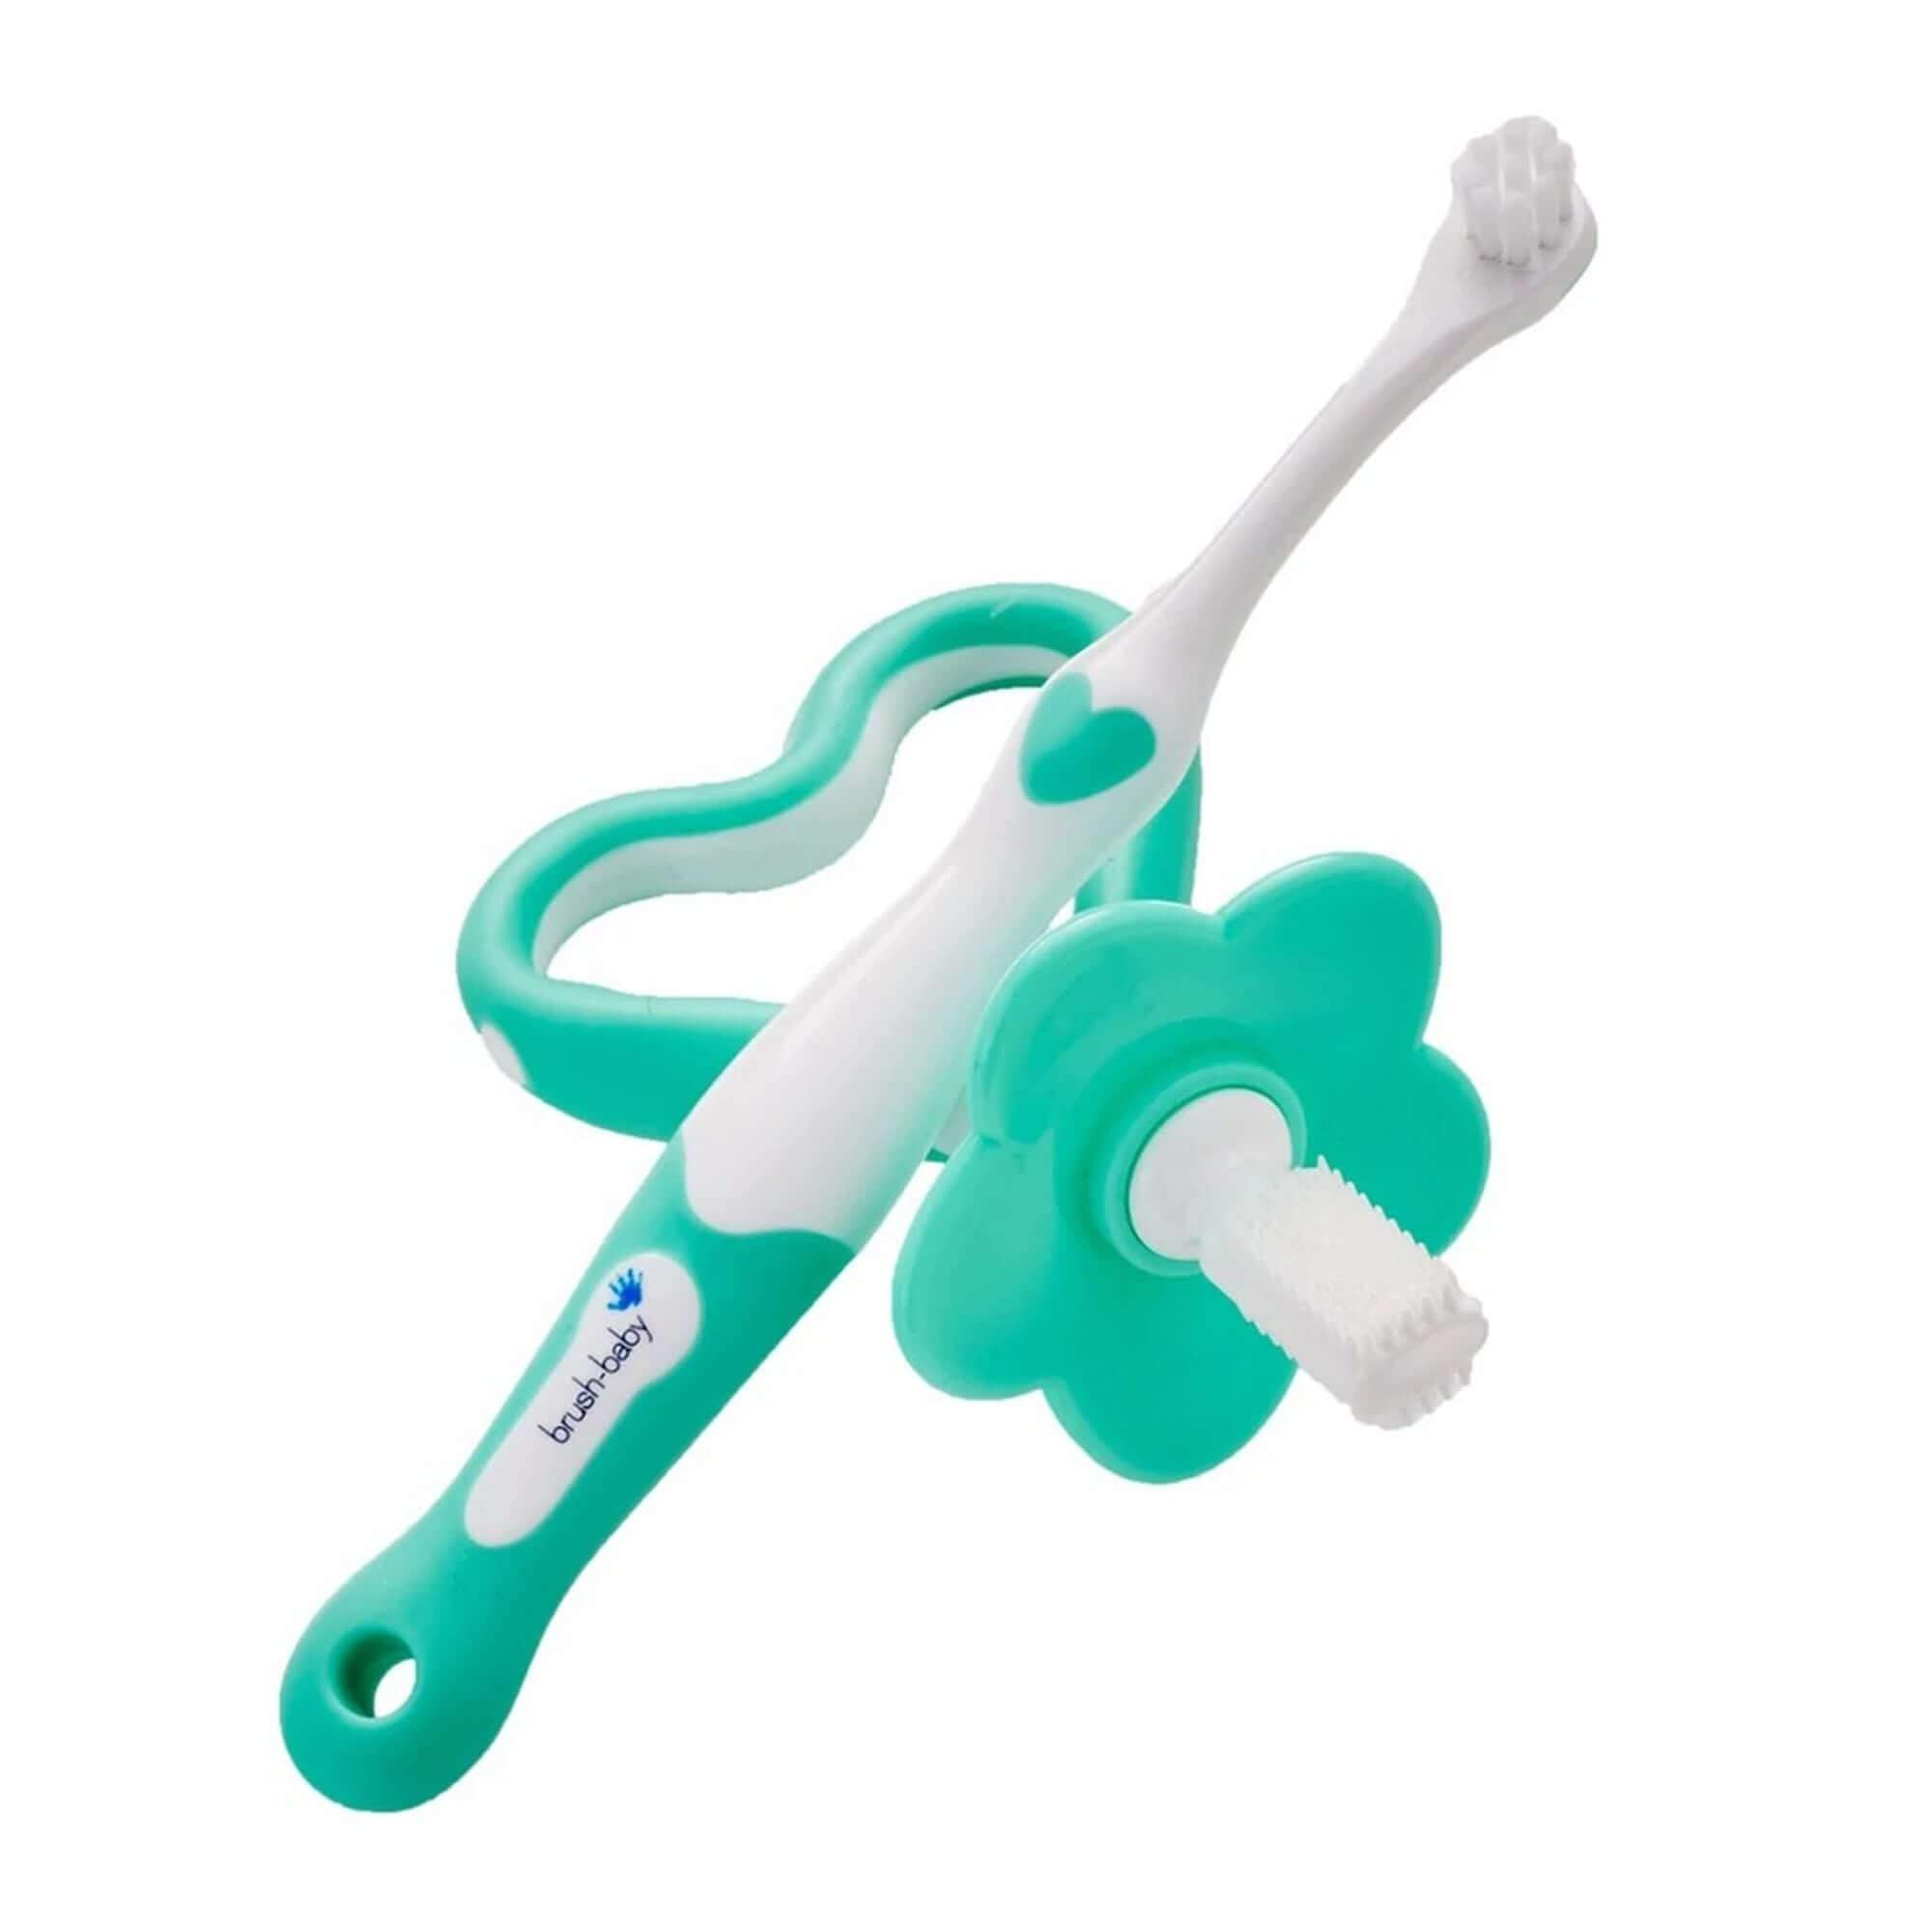 Brush Baby White & Teal My First brush & Teether Set || Birth+ to 18months - Toys4All.in